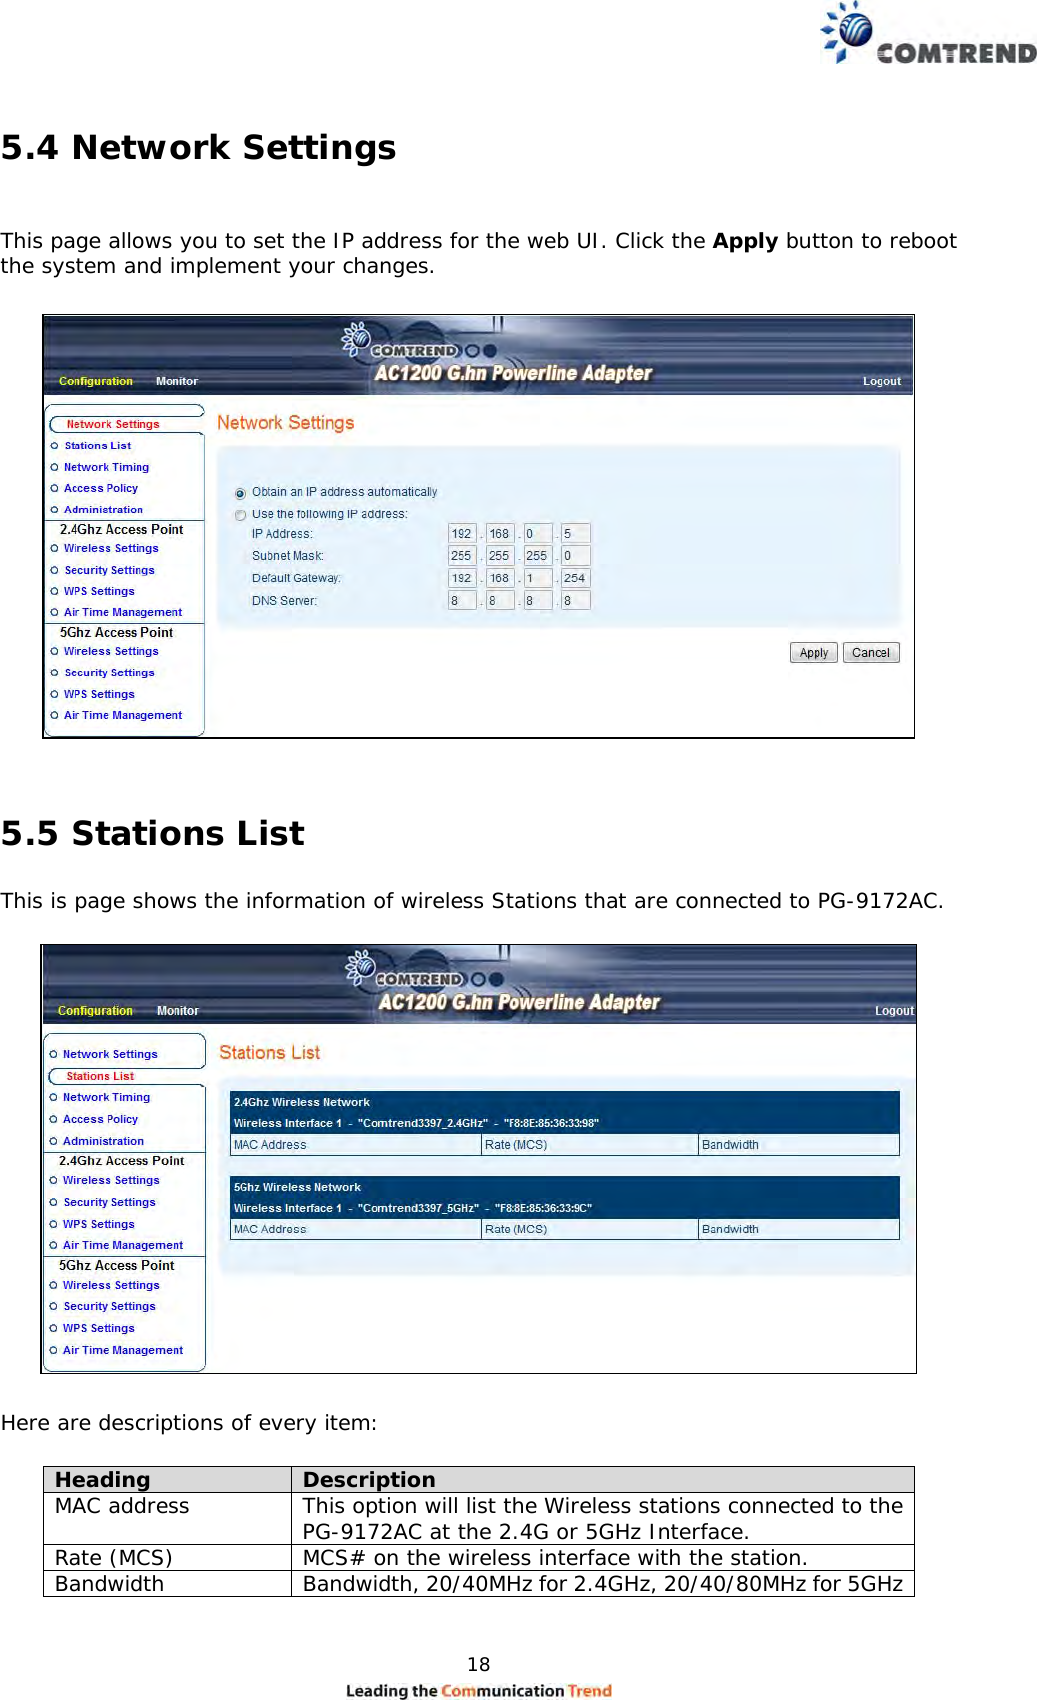  18  5.4 Network Settings   This page allows you to set the IP address for the web UI. Click the Apply button to reboot the system and implement your changes.     5.5 Stations List  This is page shows the information of wireless Stations that are connected to PG-9172AC.     Here are descriptions of every item:  Heading  Description MAC address   This option will list the Wireless stations connected to the PG-9172AC at the 2.4G or 5GHz Interface.  Rate (MCS)  MCS# on the wireless interface with the station.  Bandwidth   Bandwidth, 20/40MHz for 2.4GHz, 20/40/80MHz for 5GHz   